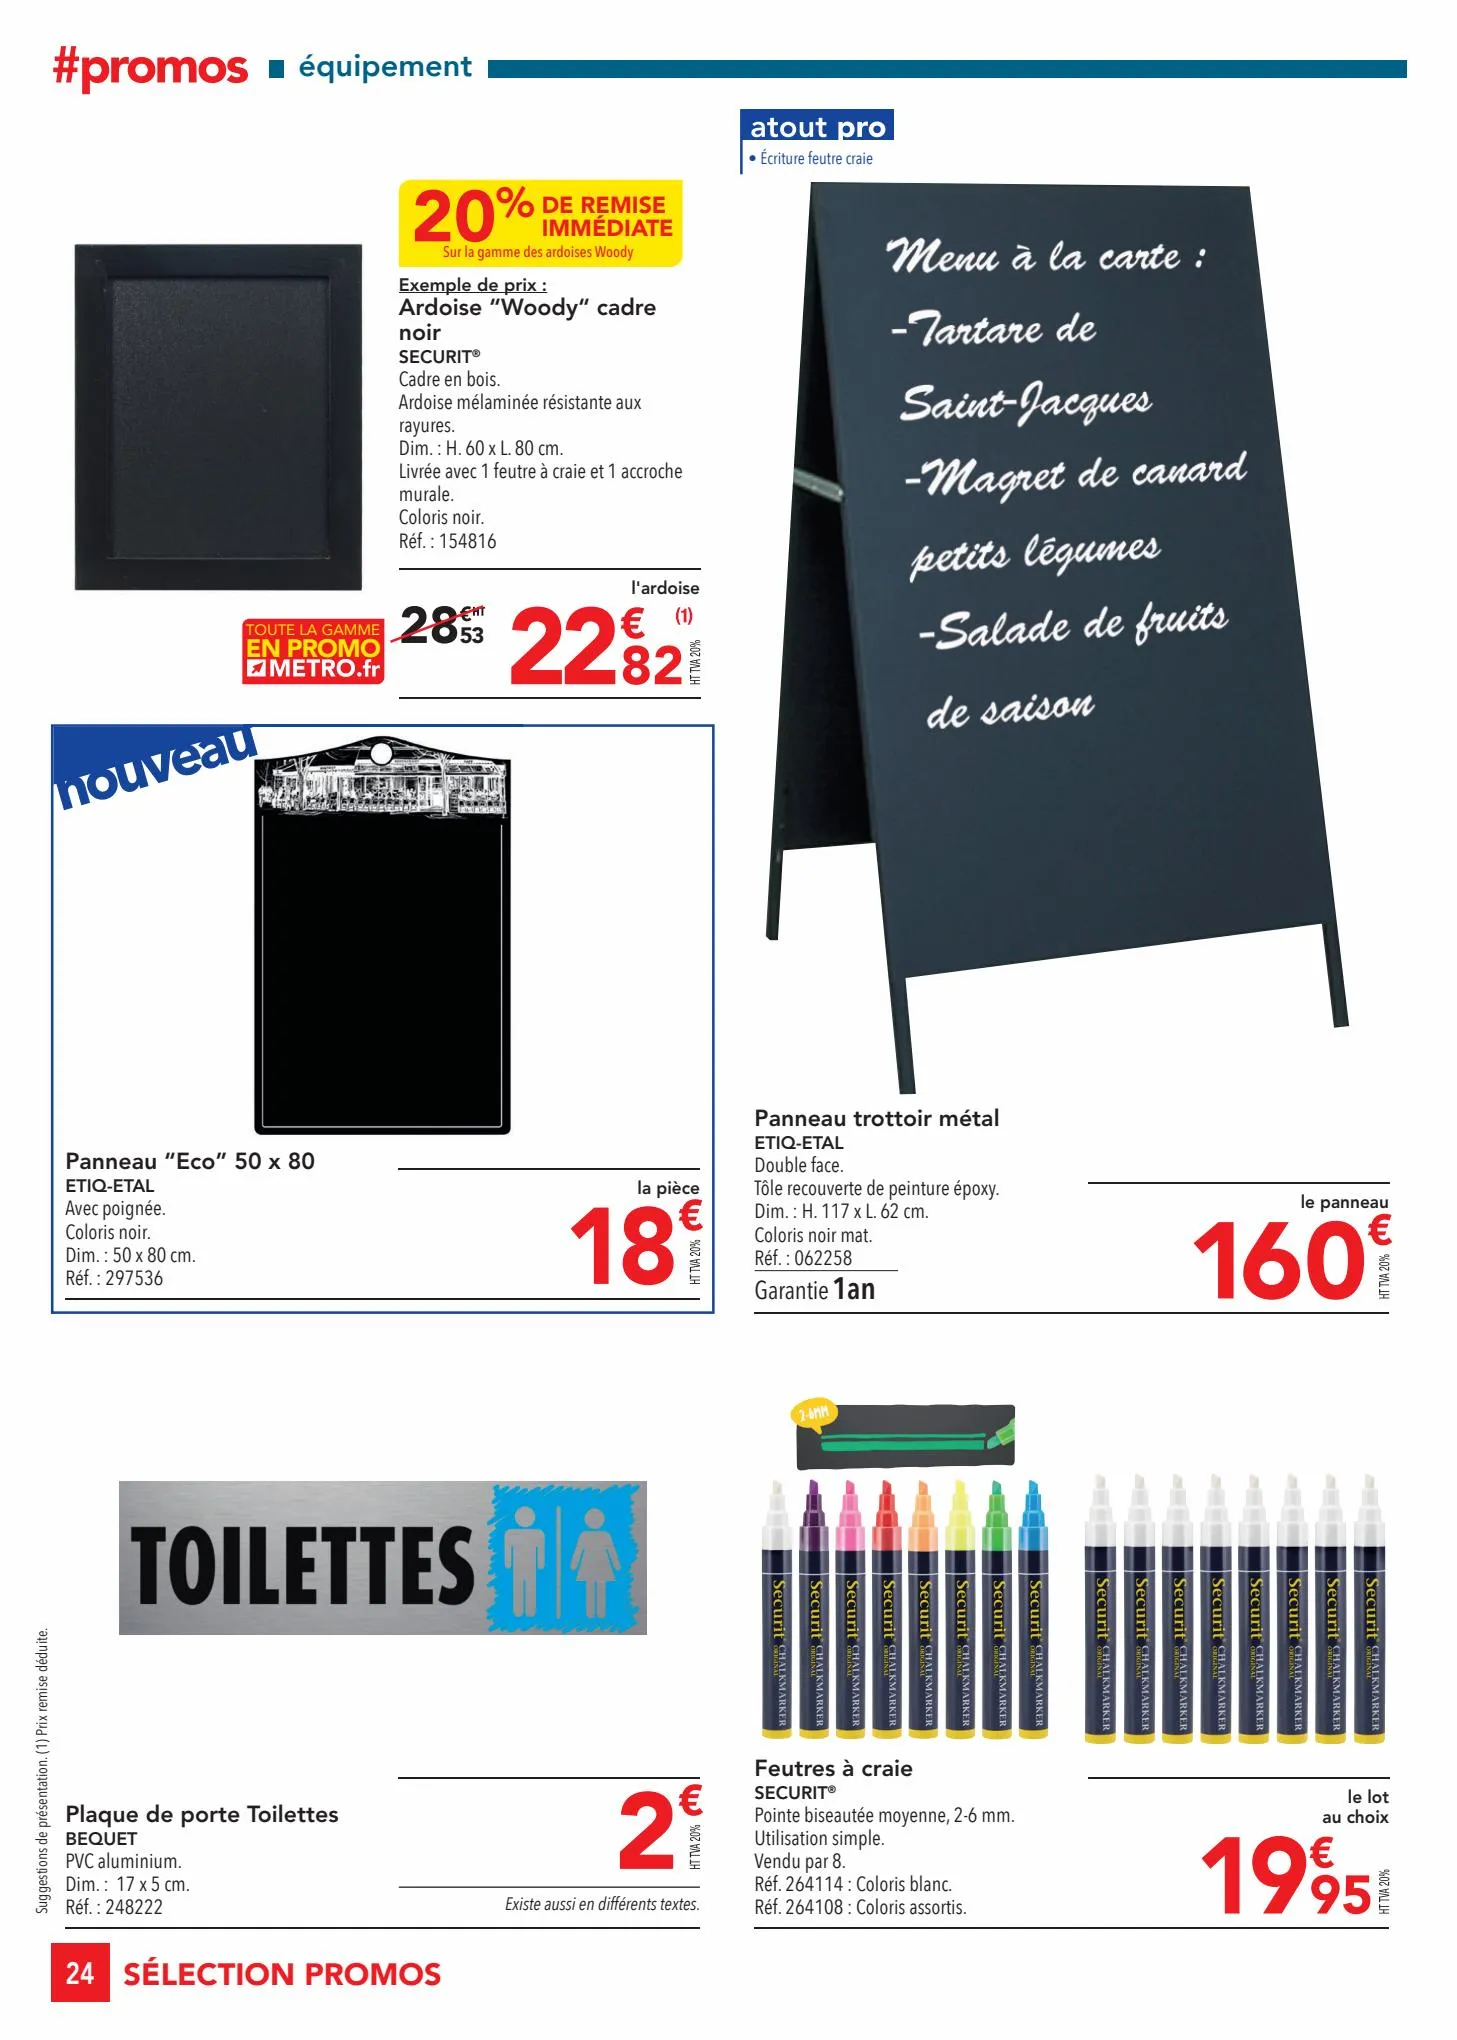 Catalogue Selection Promos Equipement, page 00024